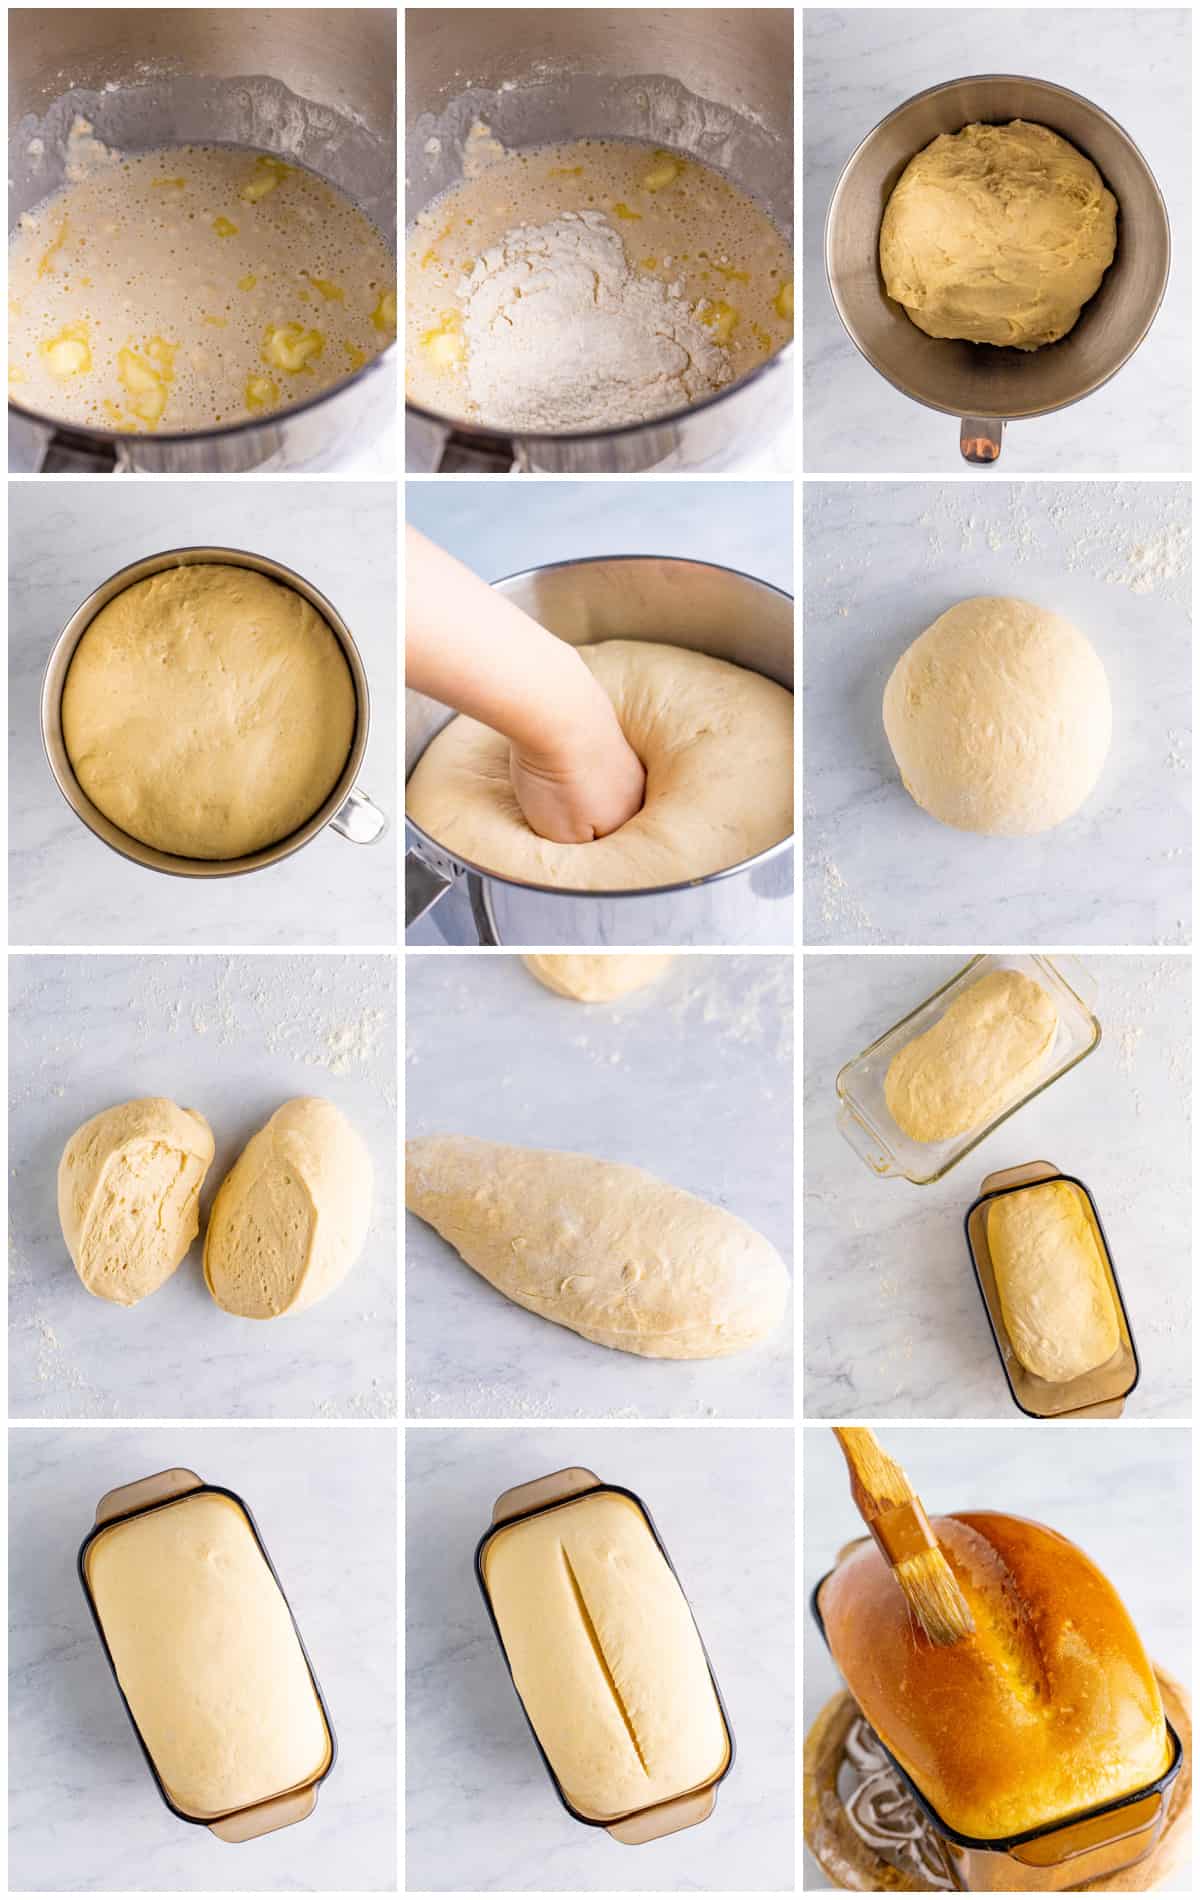 Step by step photos on how to make a White Bread Recipe.